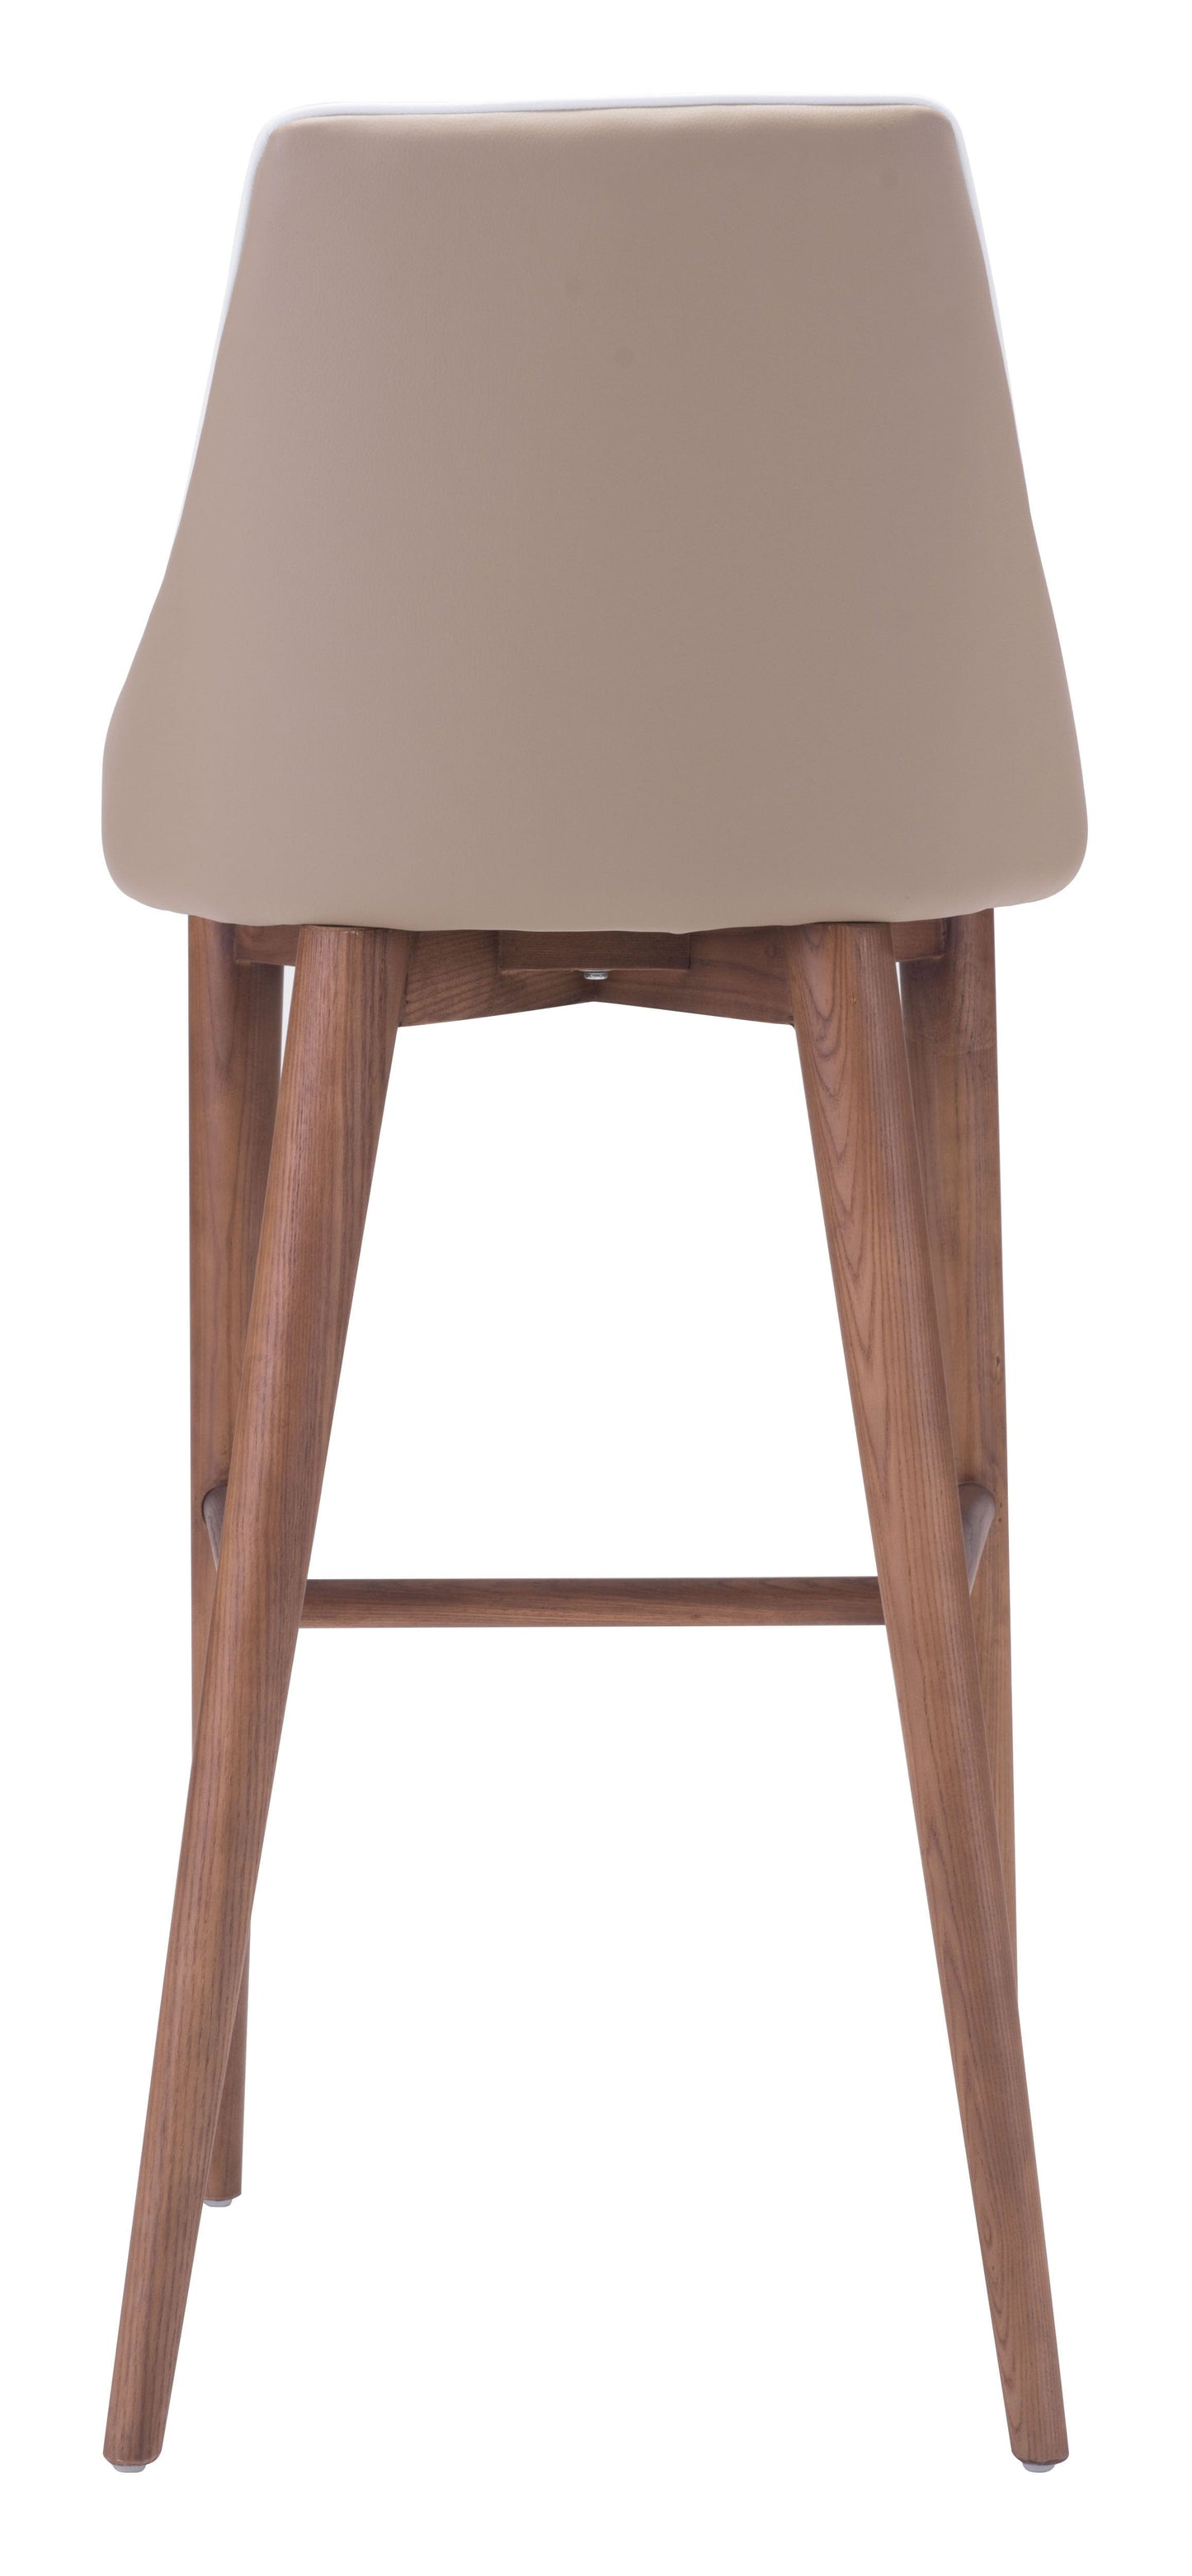 Back View of barstool 